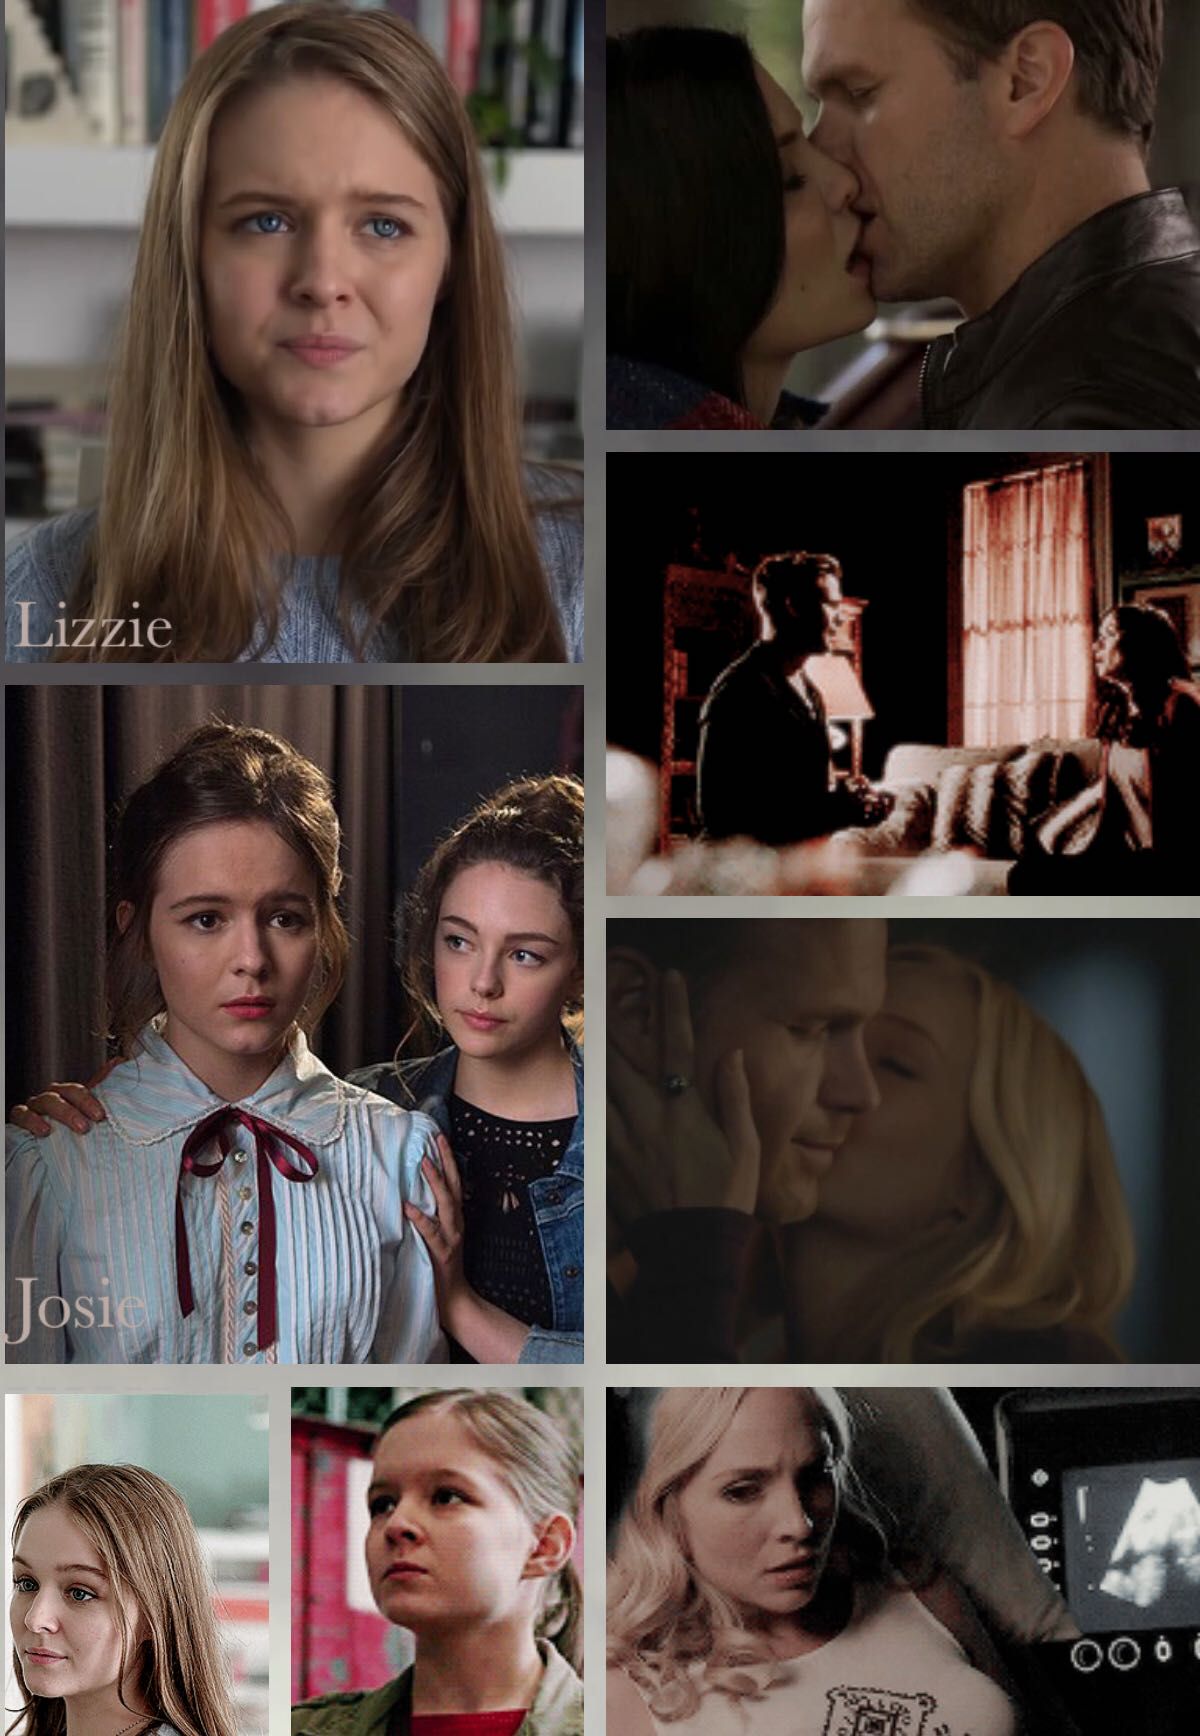 We Are Their Legacies (Time Travel Fanfic)- The Originals TVD Crossover Izzy And Jocelyn Joss Laughman Aka Lizzie And Josie Saltzman